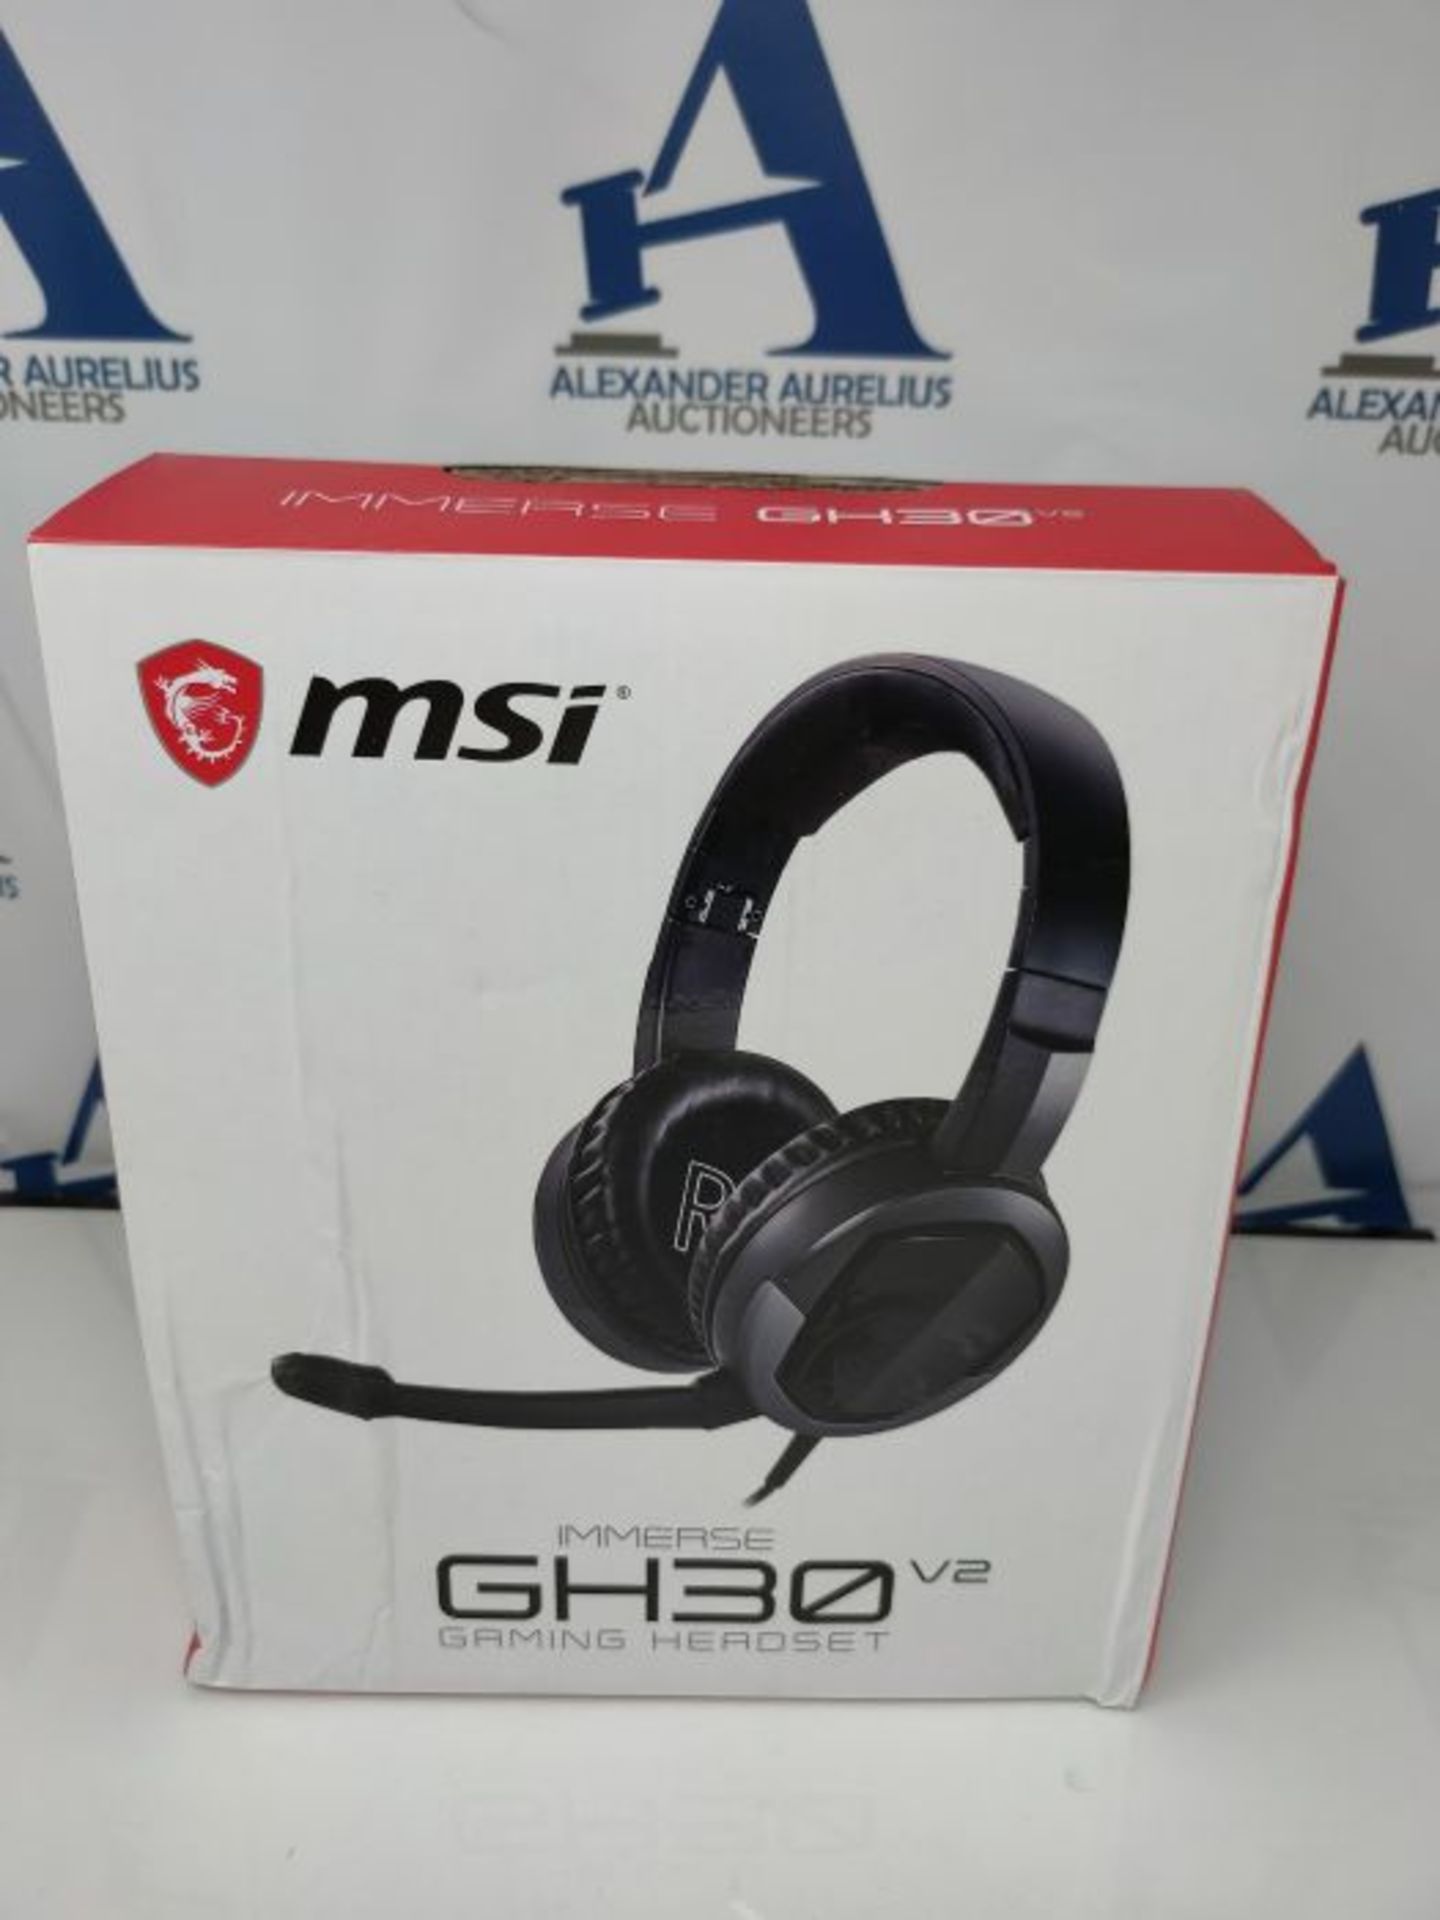 MSI IMMERSE GH30 V2 GAMING HEADSET - Stereo Headphones, Lightweight & Foldable Design, - Image 2 of 3